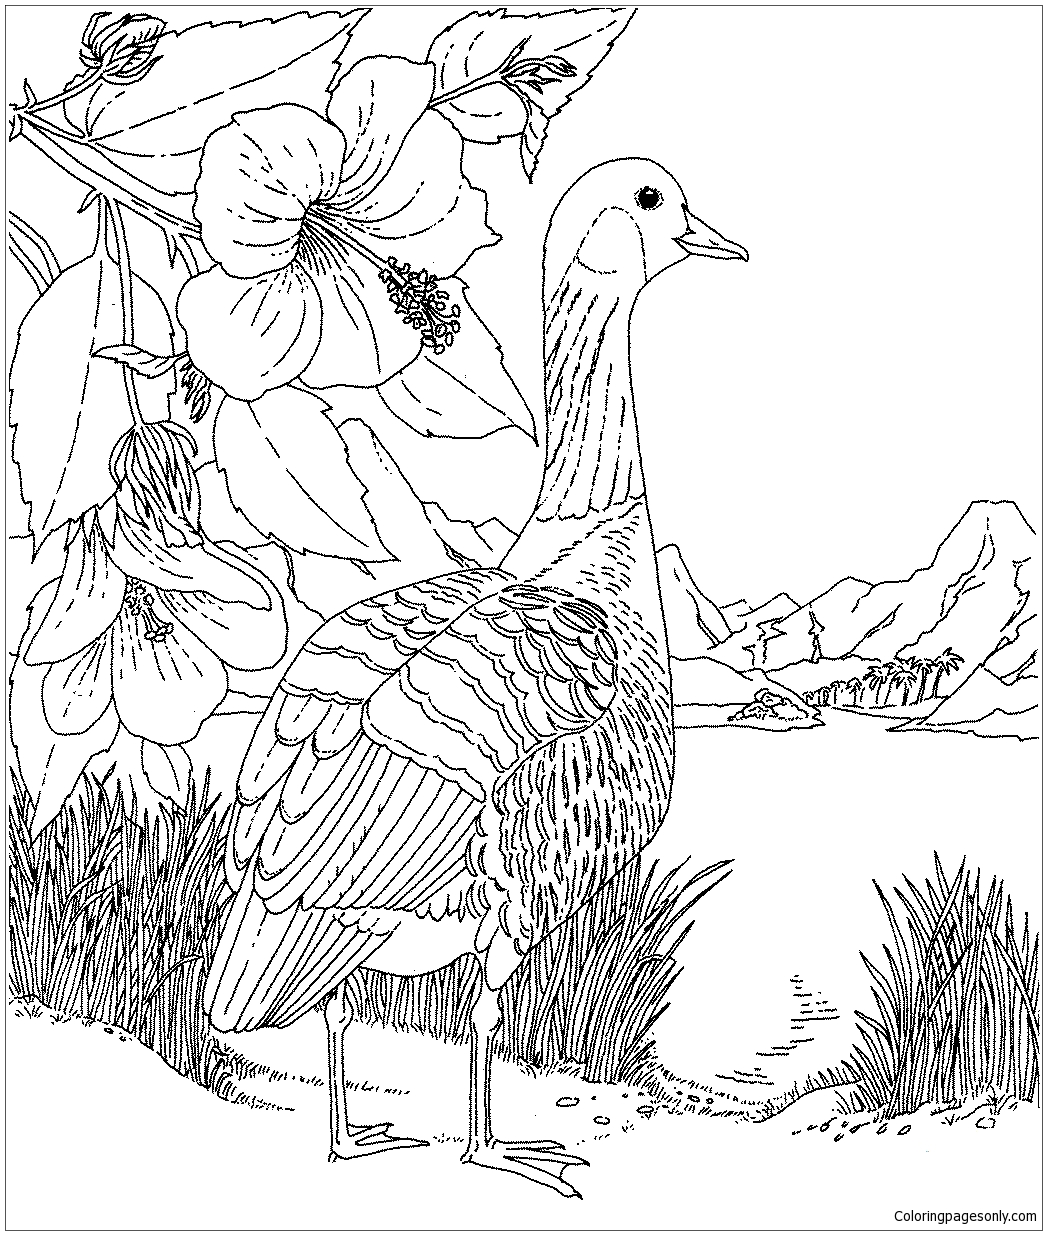 Nene et Hibiscus Hawaii State Bird and Flower Coloring Page